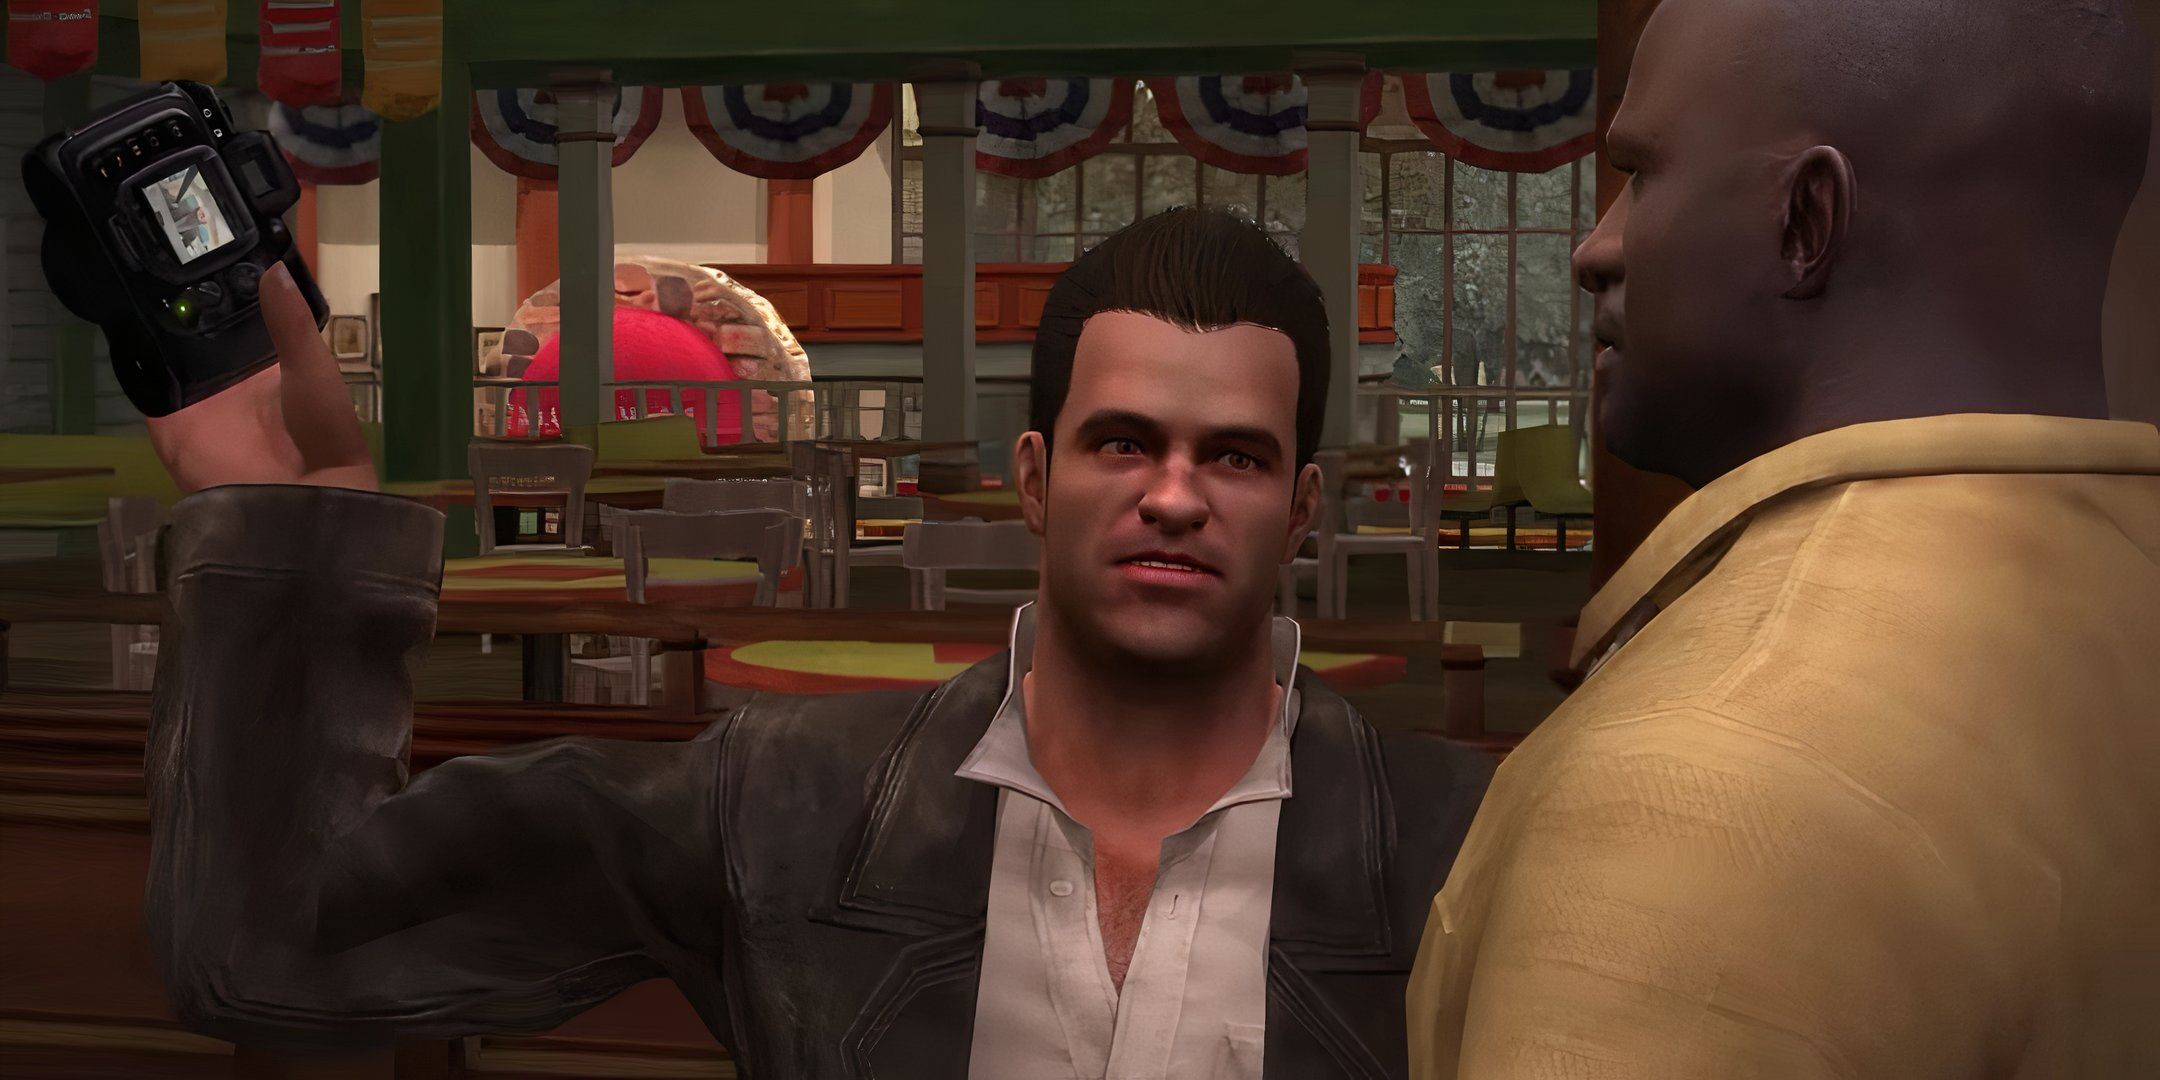 Capcom has not asked Frank West’s voice actor to return for the Dead Rising remake